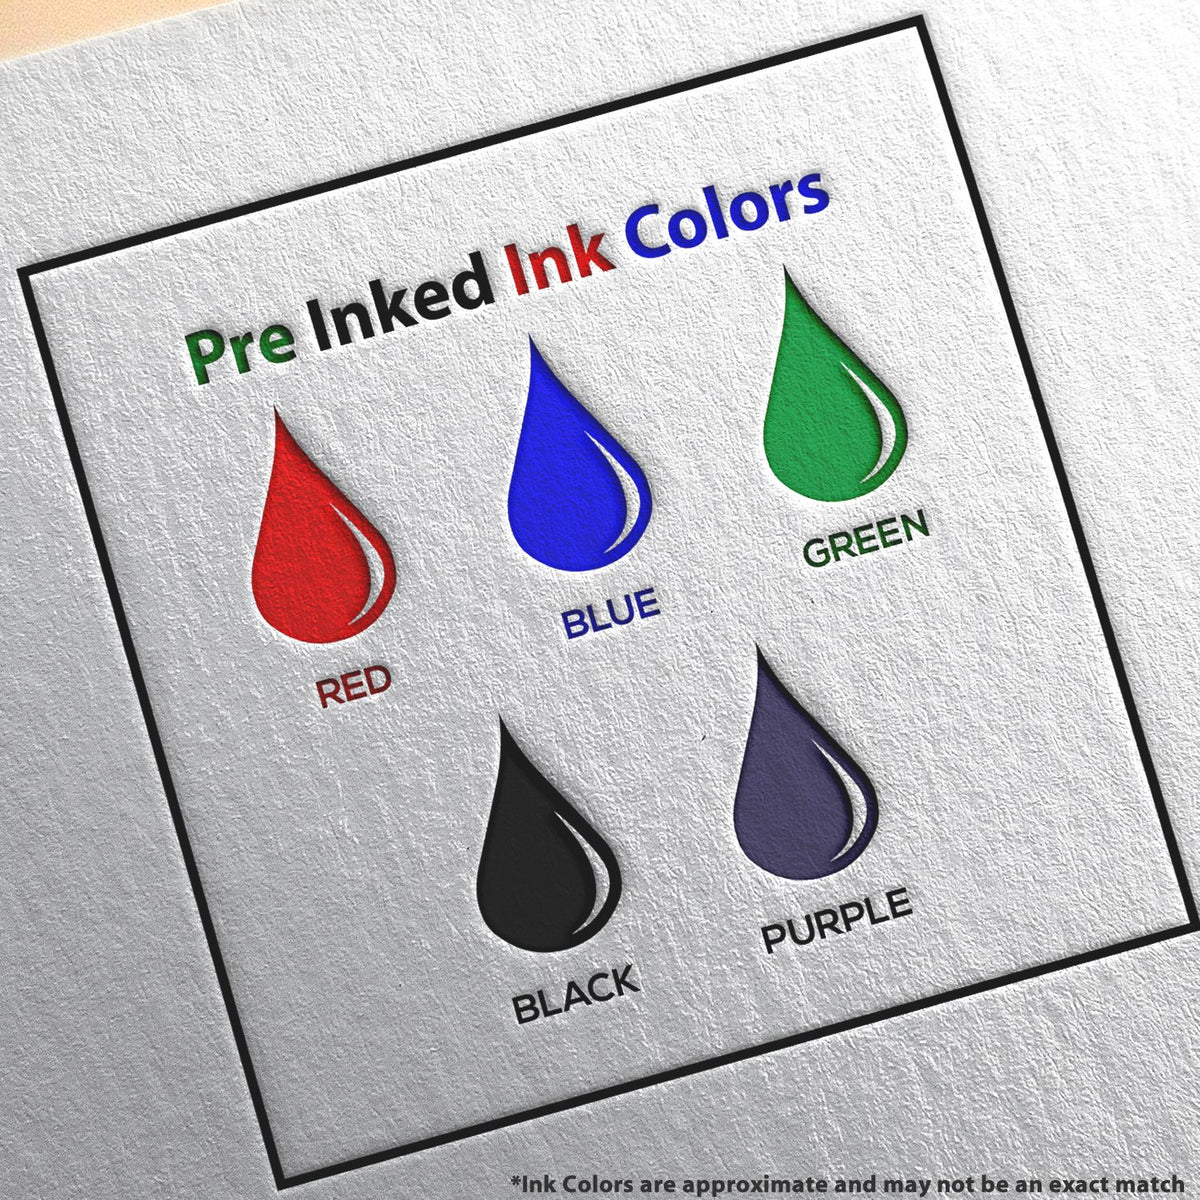 A picture showing the different ink colors or hues available for the Premium MaxLight Pre-Inked Tennessee Geology Stamp